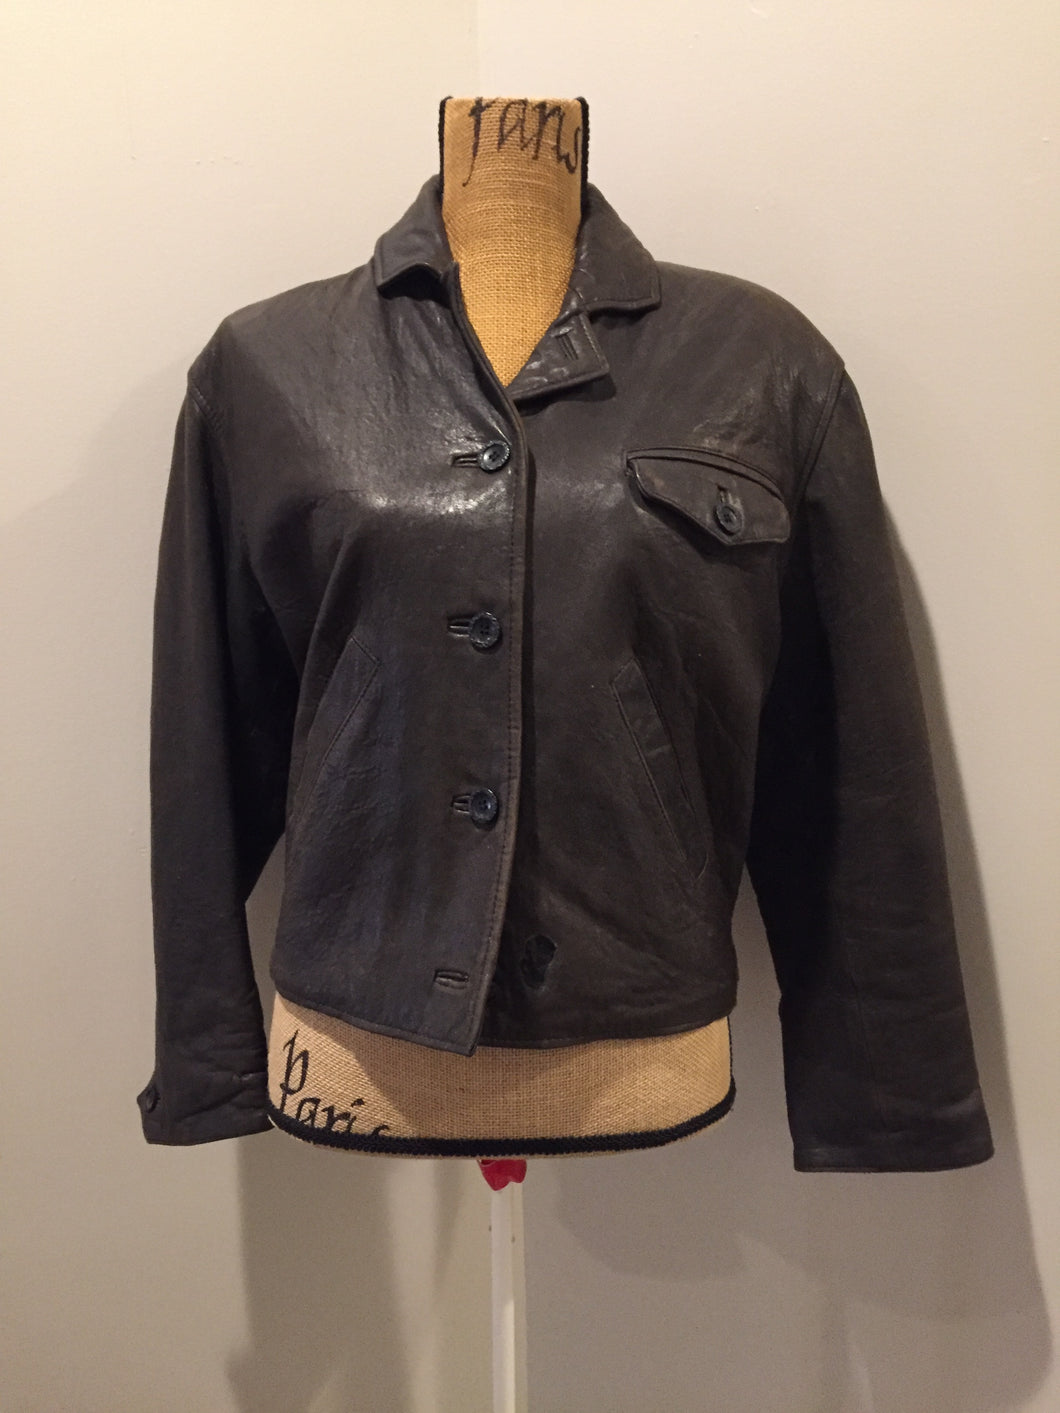 Kingspier Vintage - Blueline and Company dark brown leather jacket with button closures, slash pockets and one flap pocket on the chest. Size small.